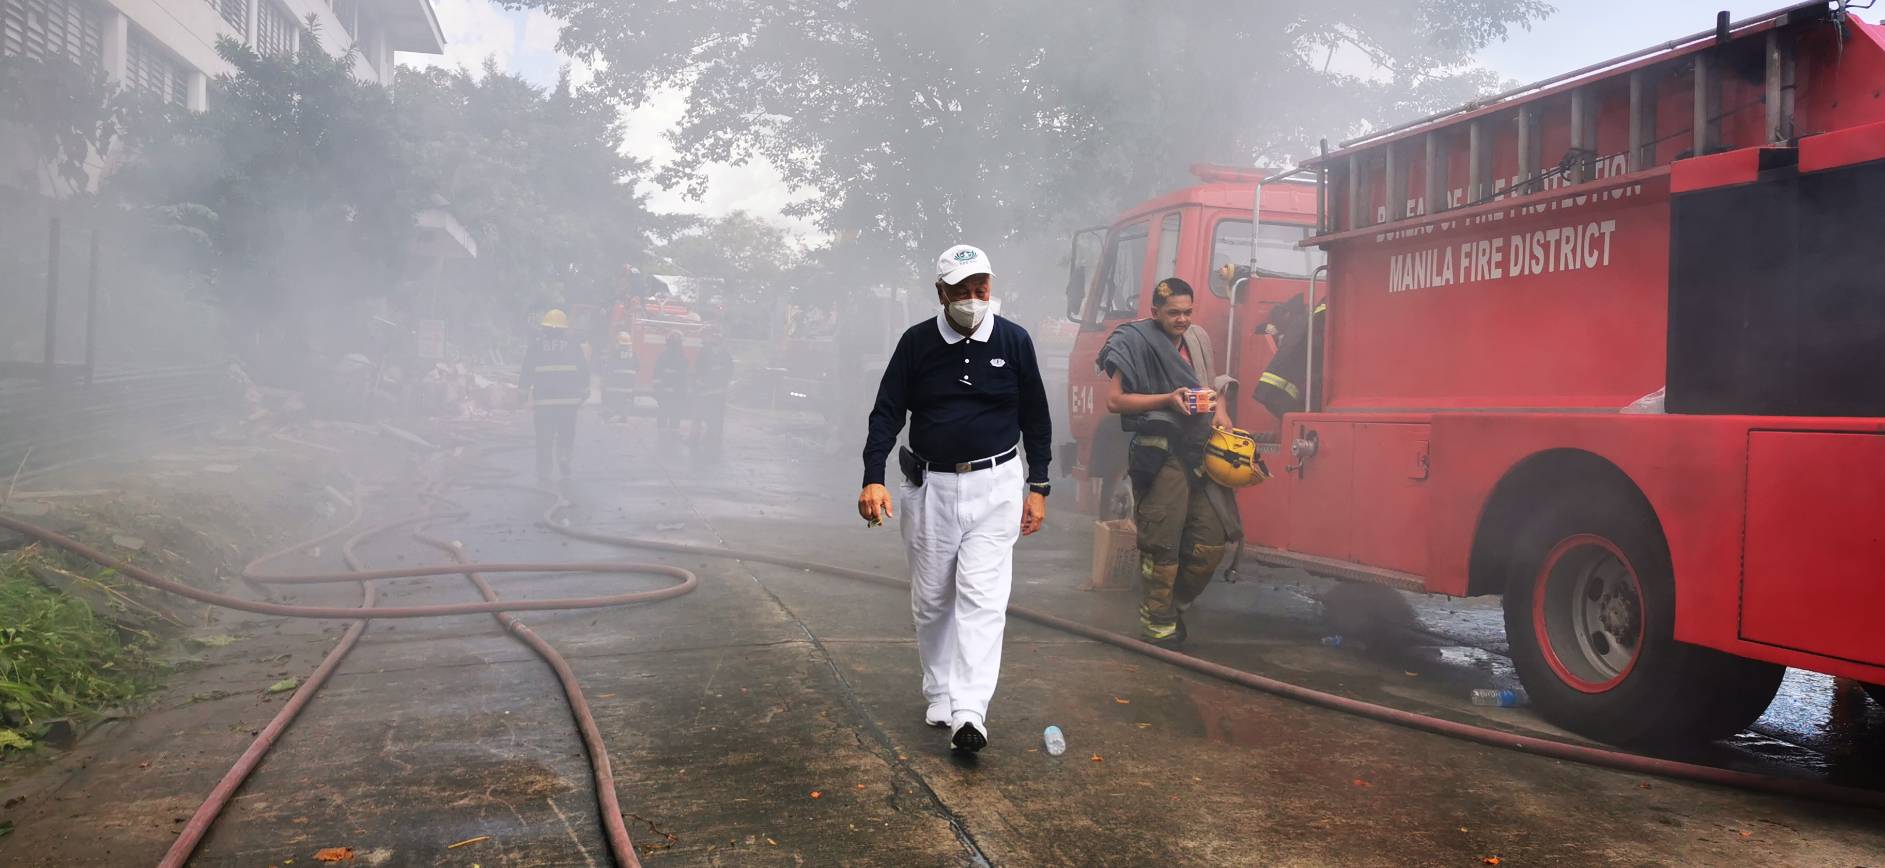 Tzu Chi Philippines CEO walking away from the building after firefighters had put out the fire. 【Photo by Johnny Kwok】